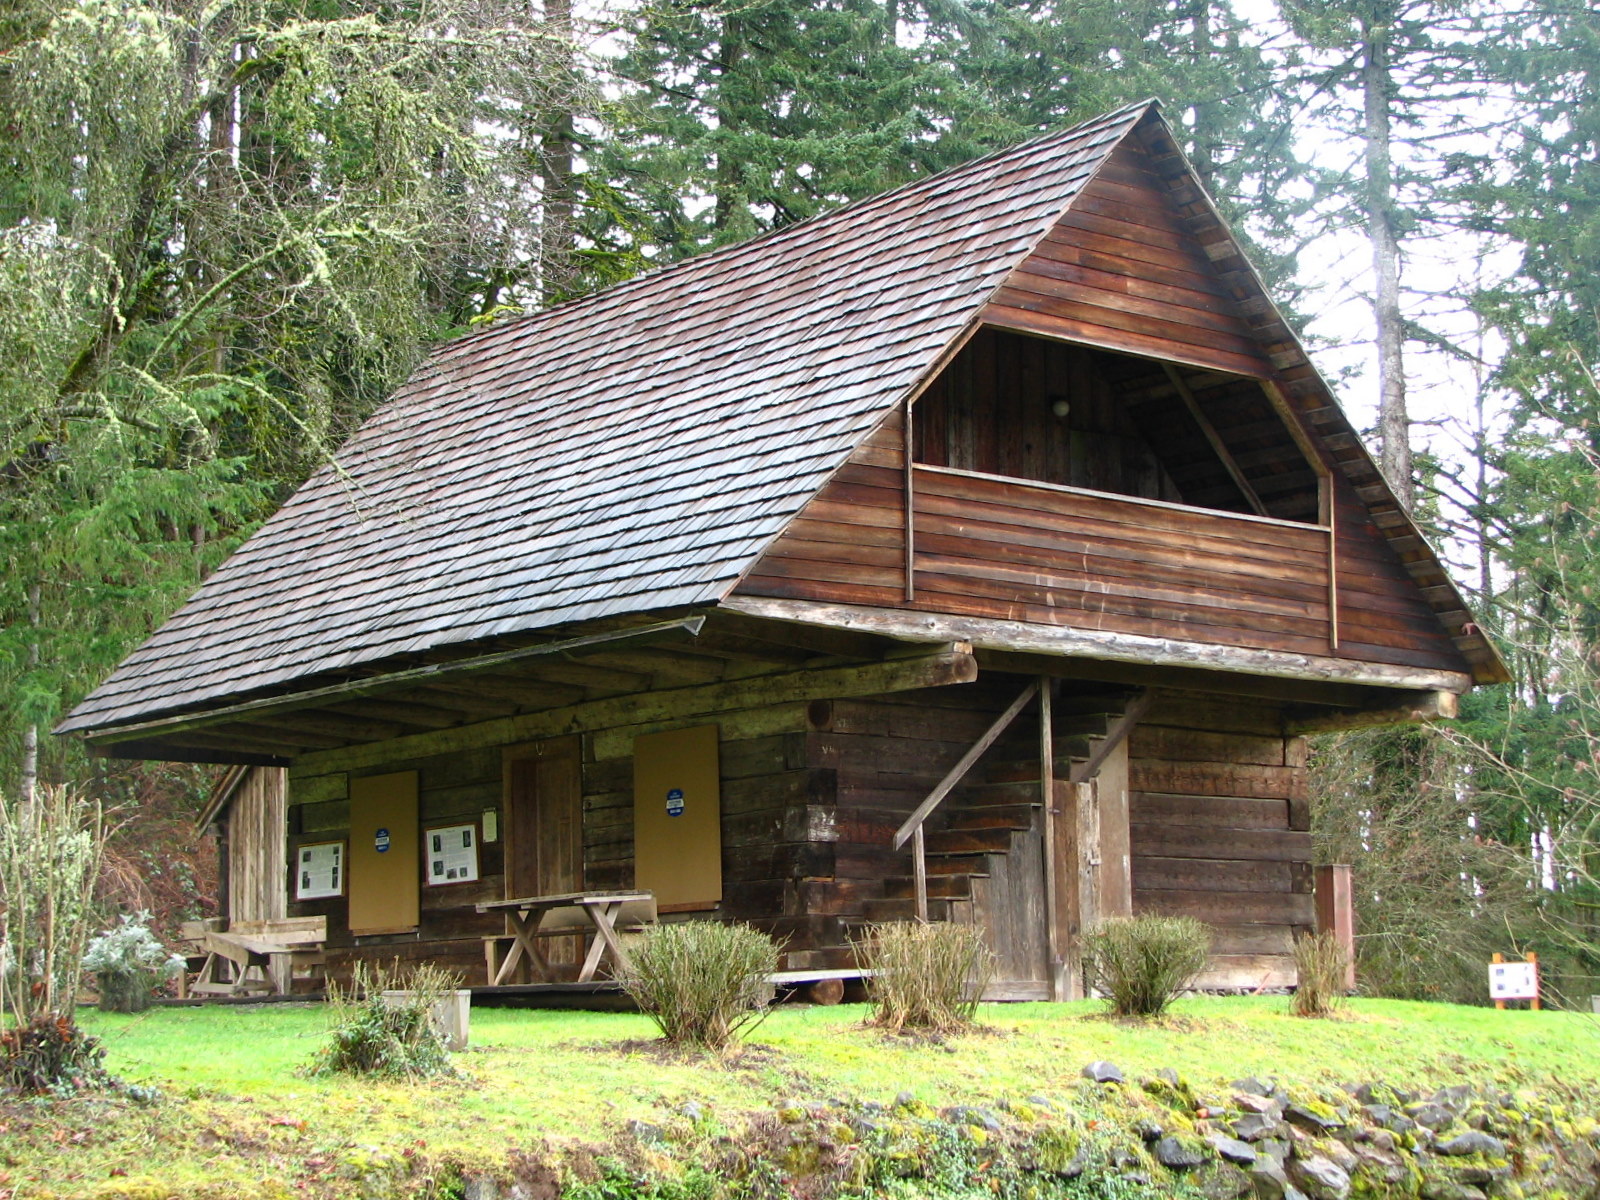 Photograph of a two-story log cabin, with an extreme overhang of the second